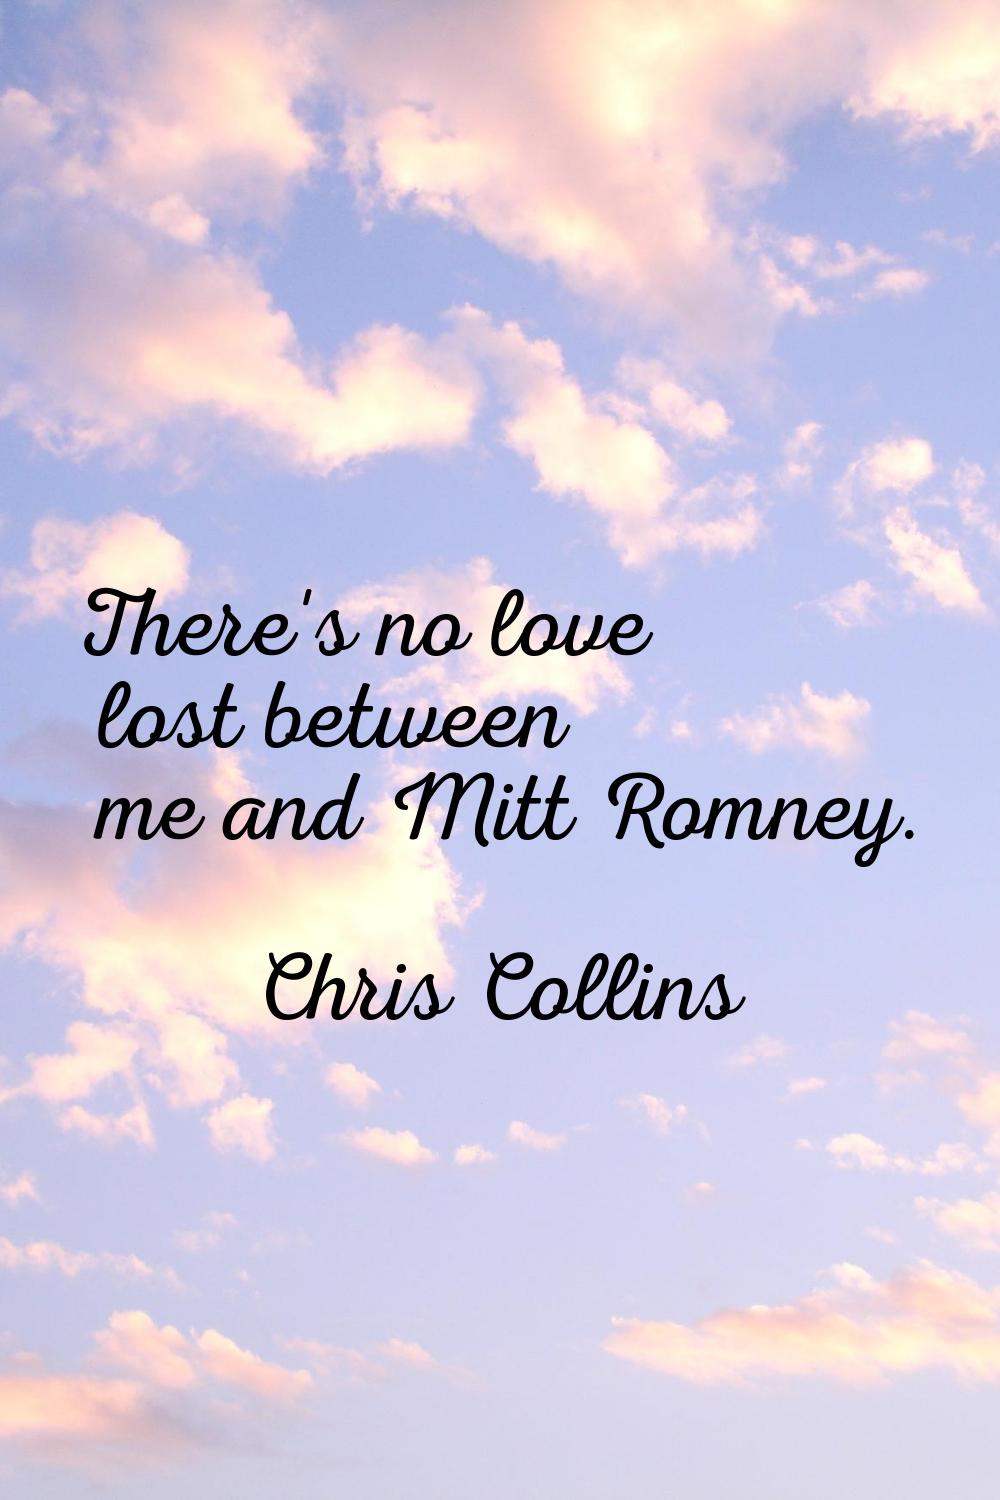 There's no love lost between me and Mitt Romney.